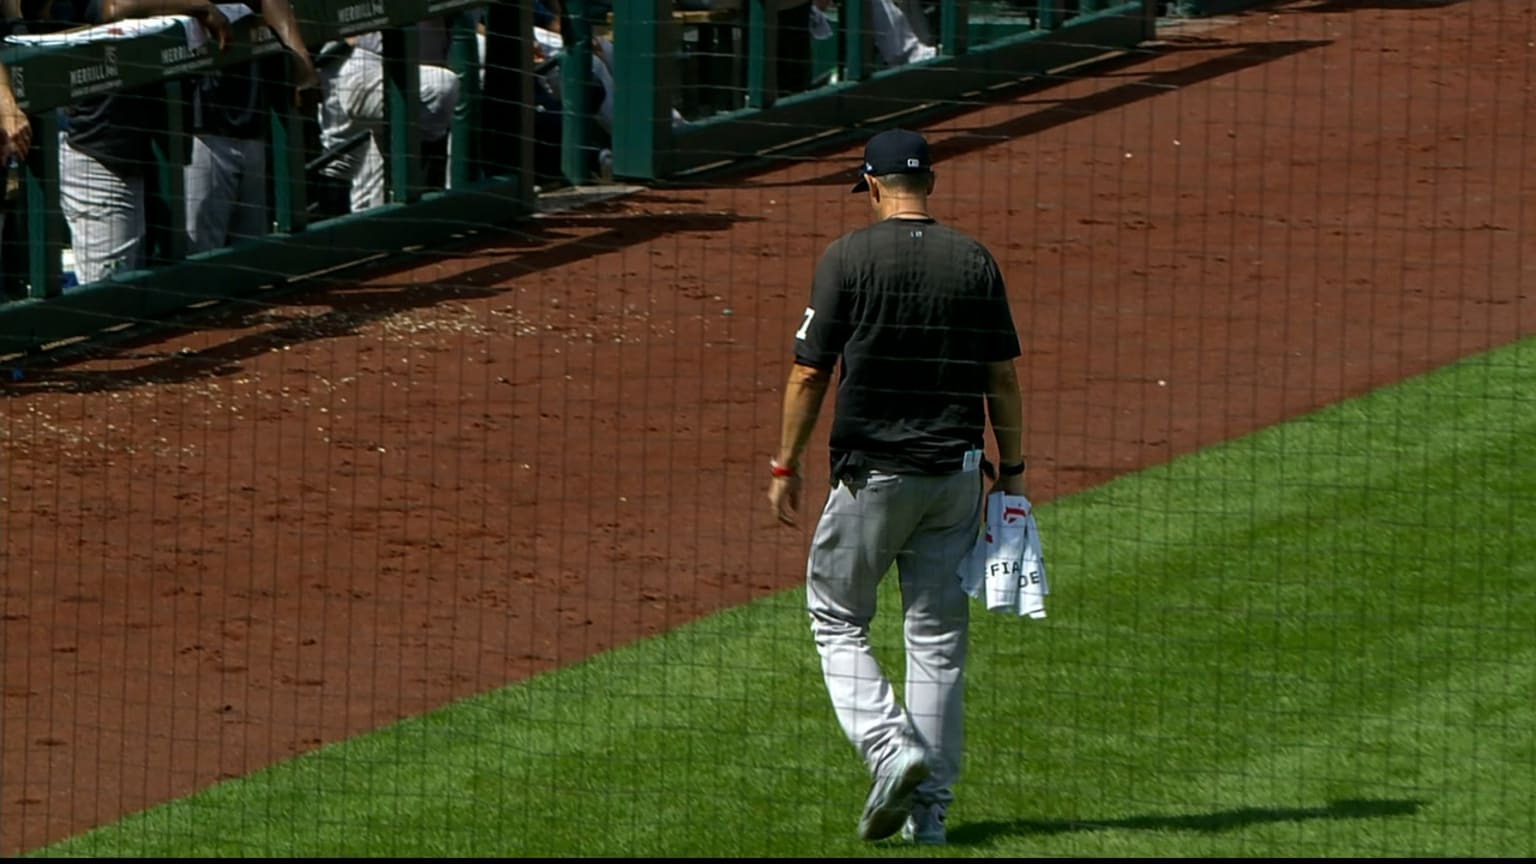 Aaron Boone ejected for 5th time this season